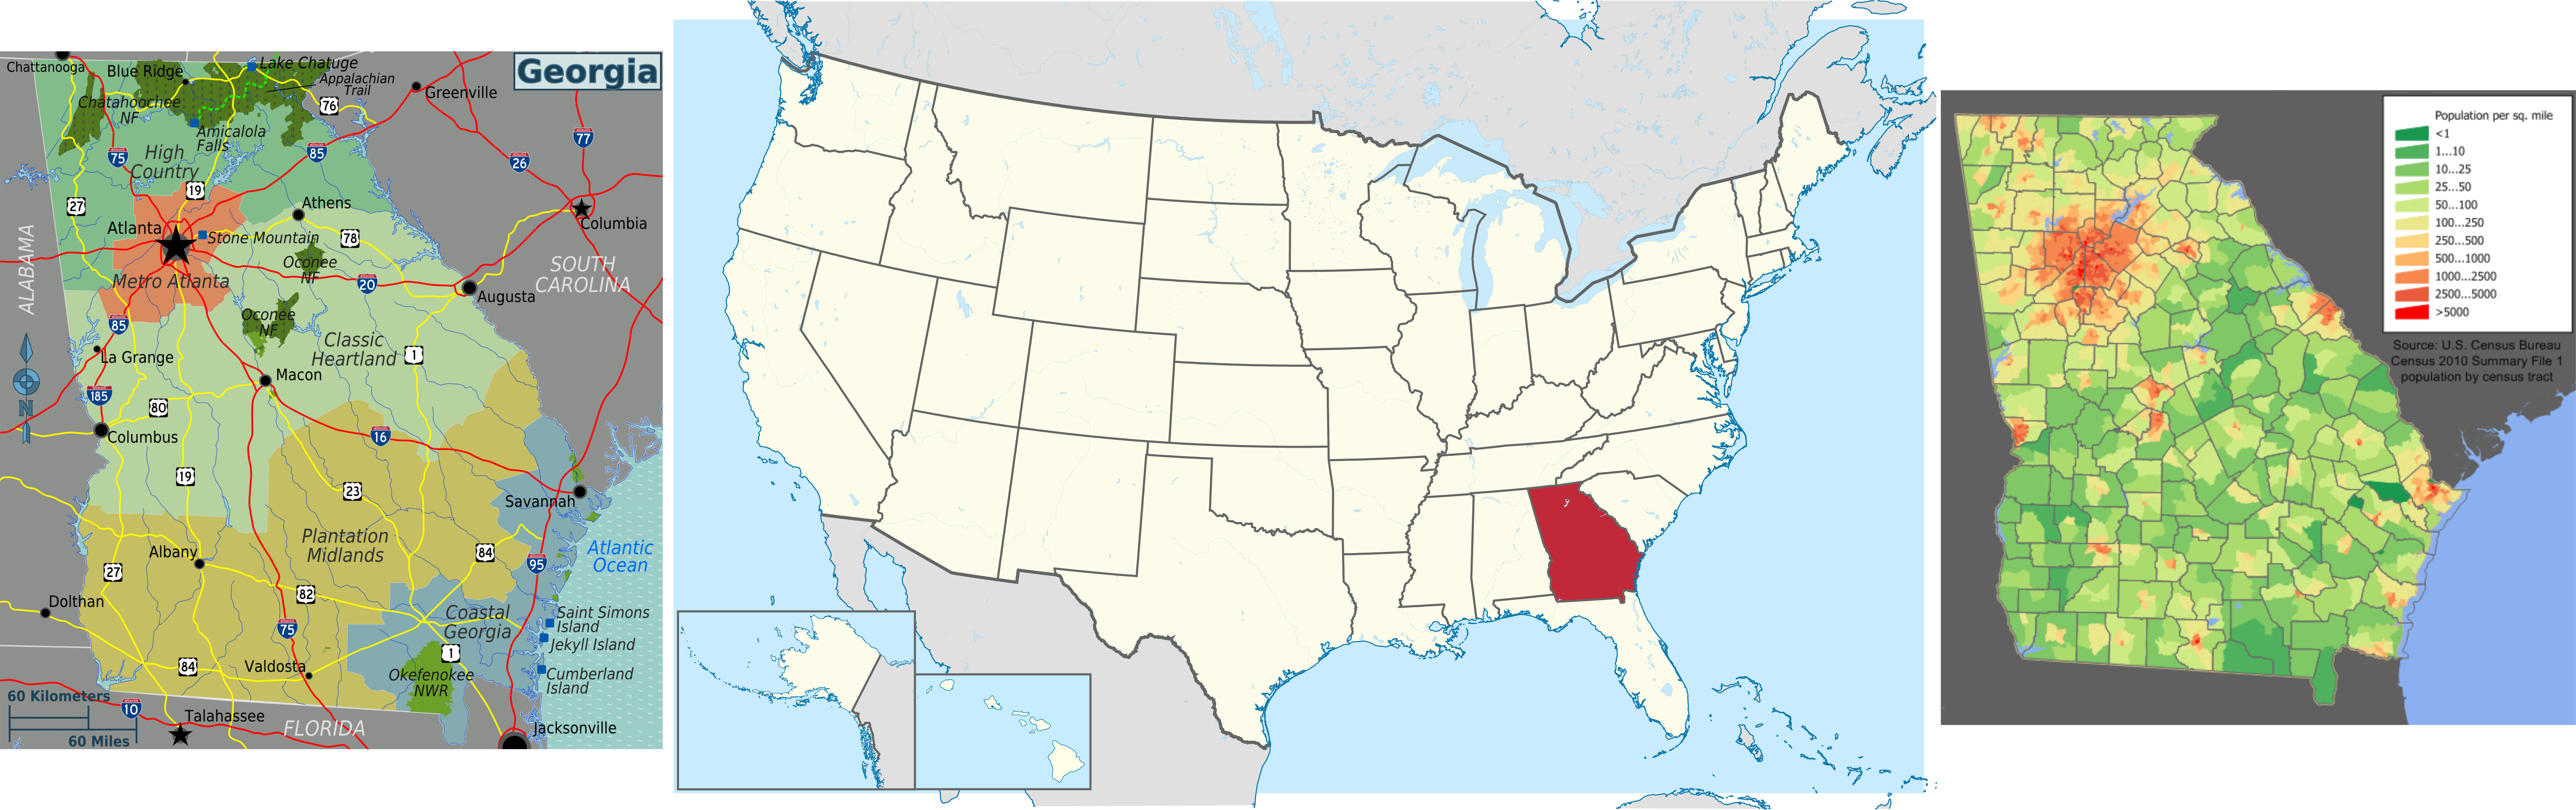 Three different maps of the state of Georgia.